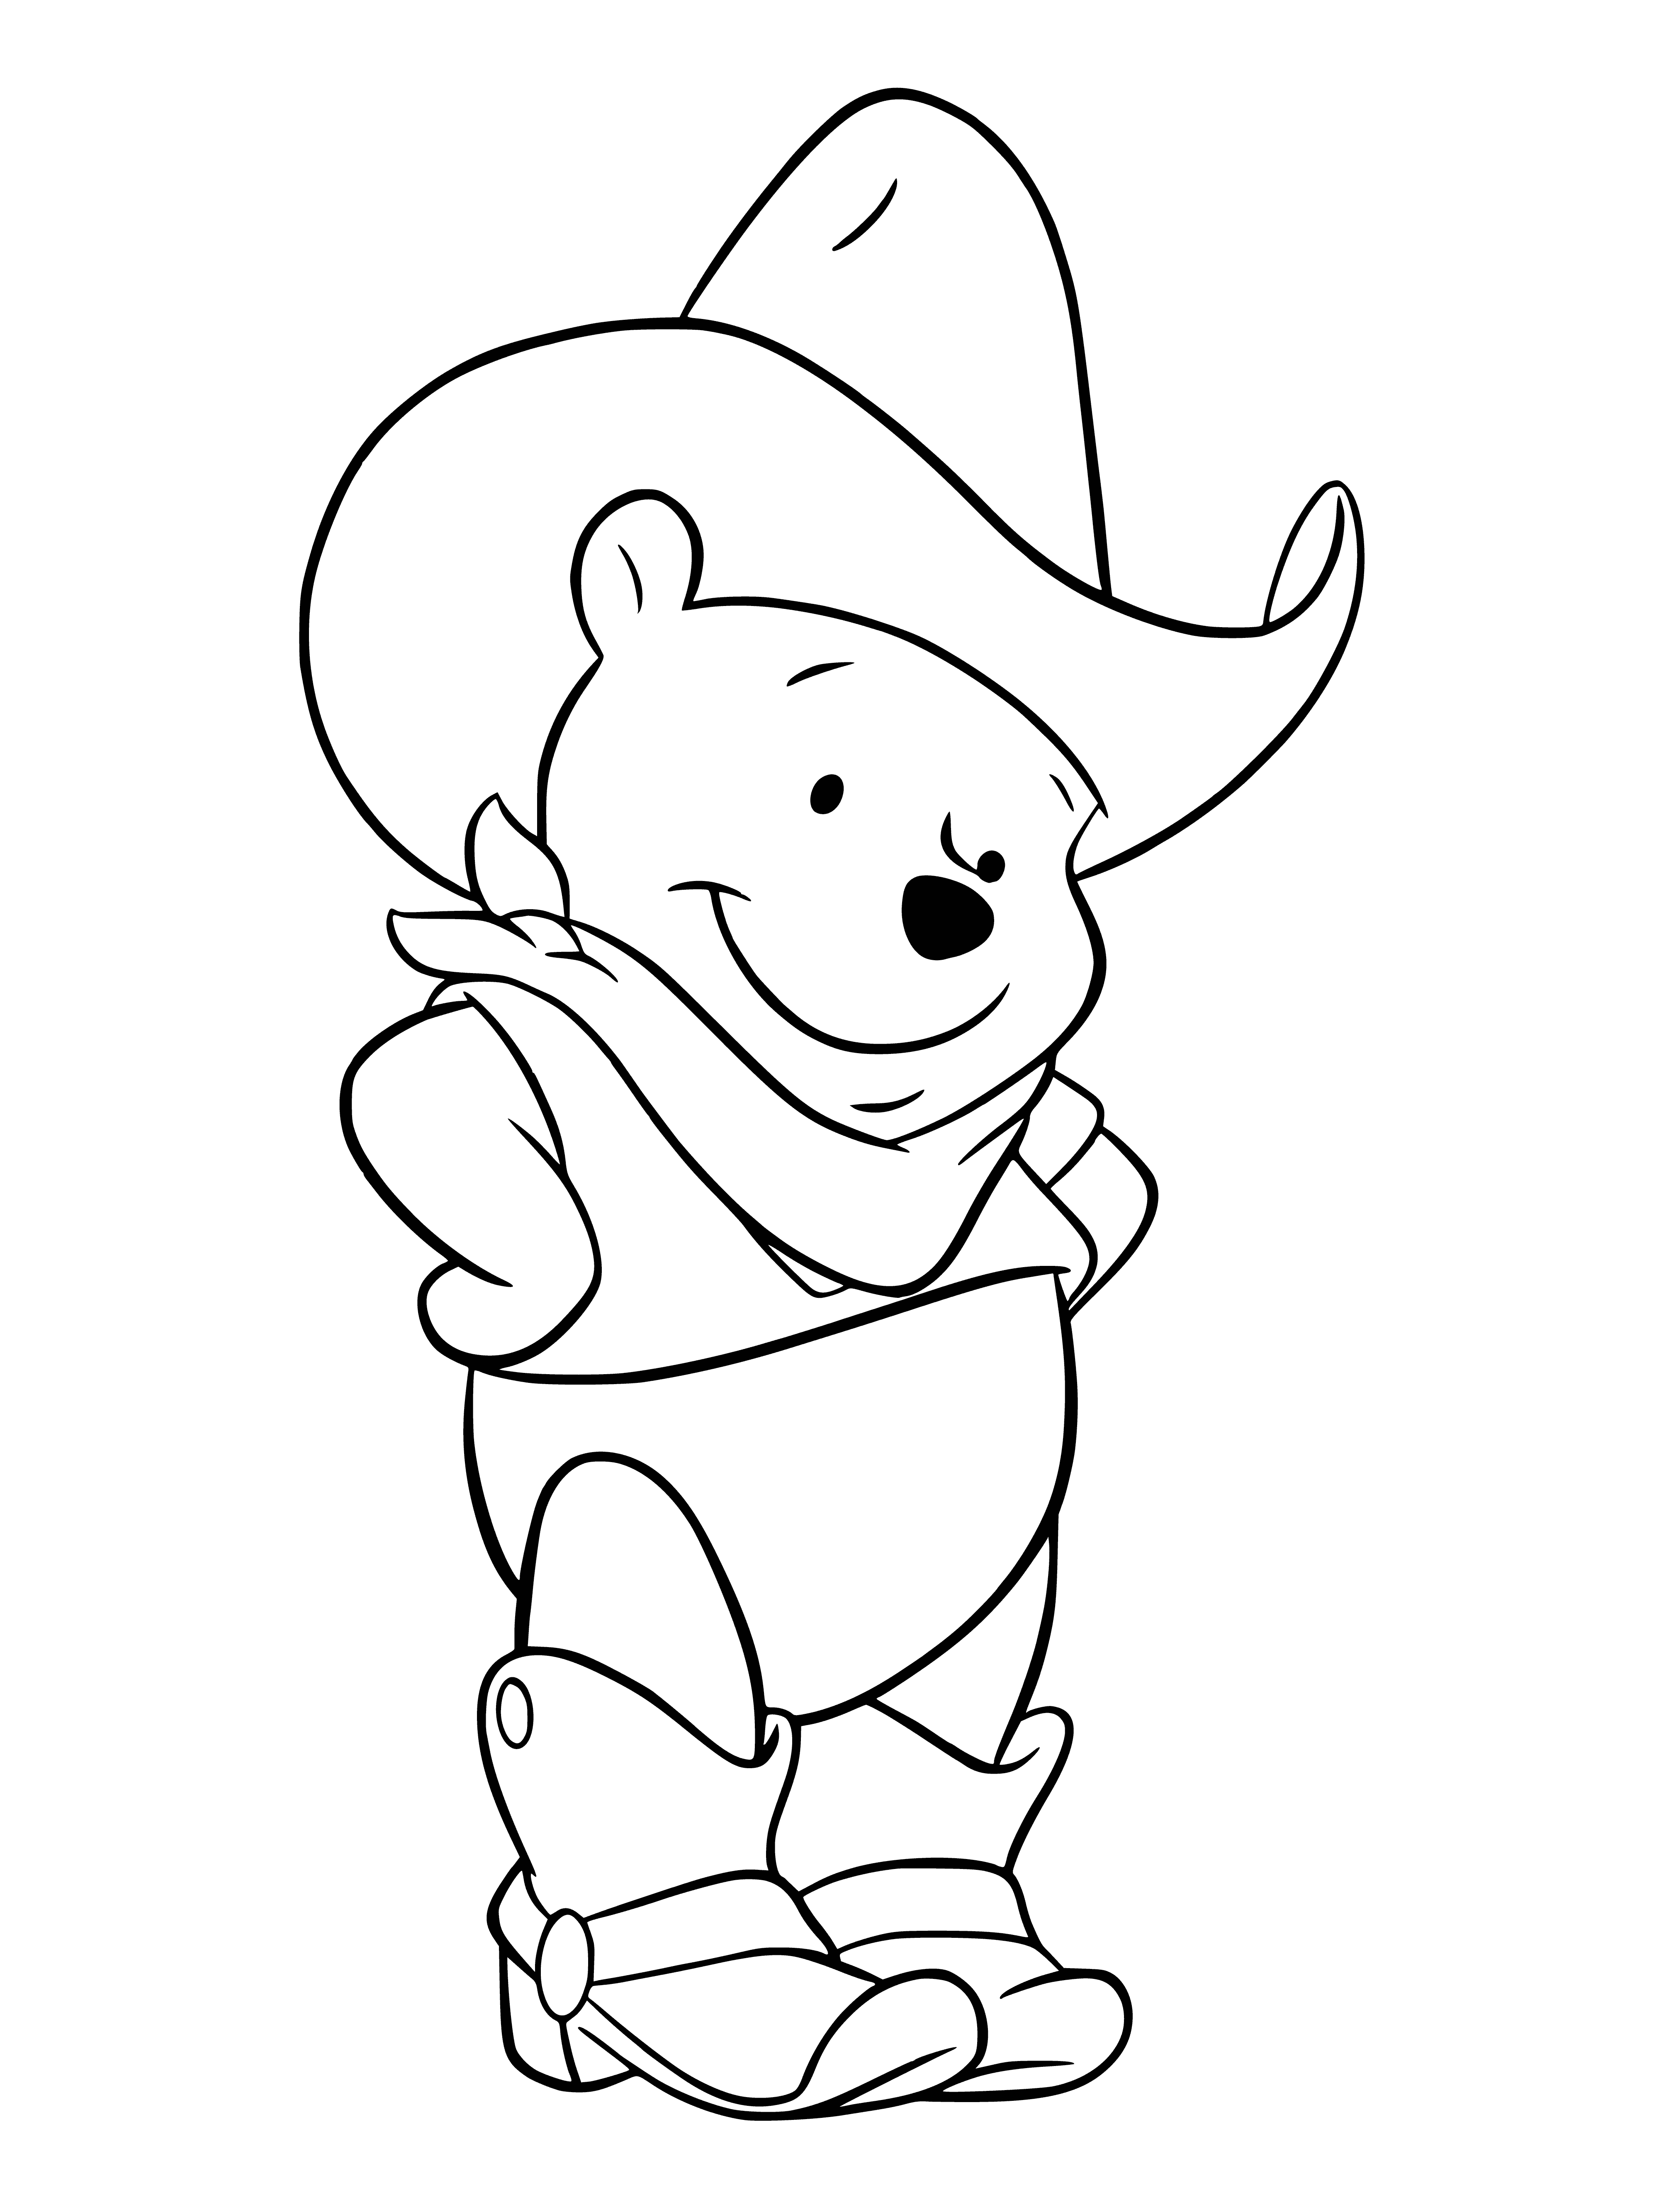 Winnie is a cowboy coloring page